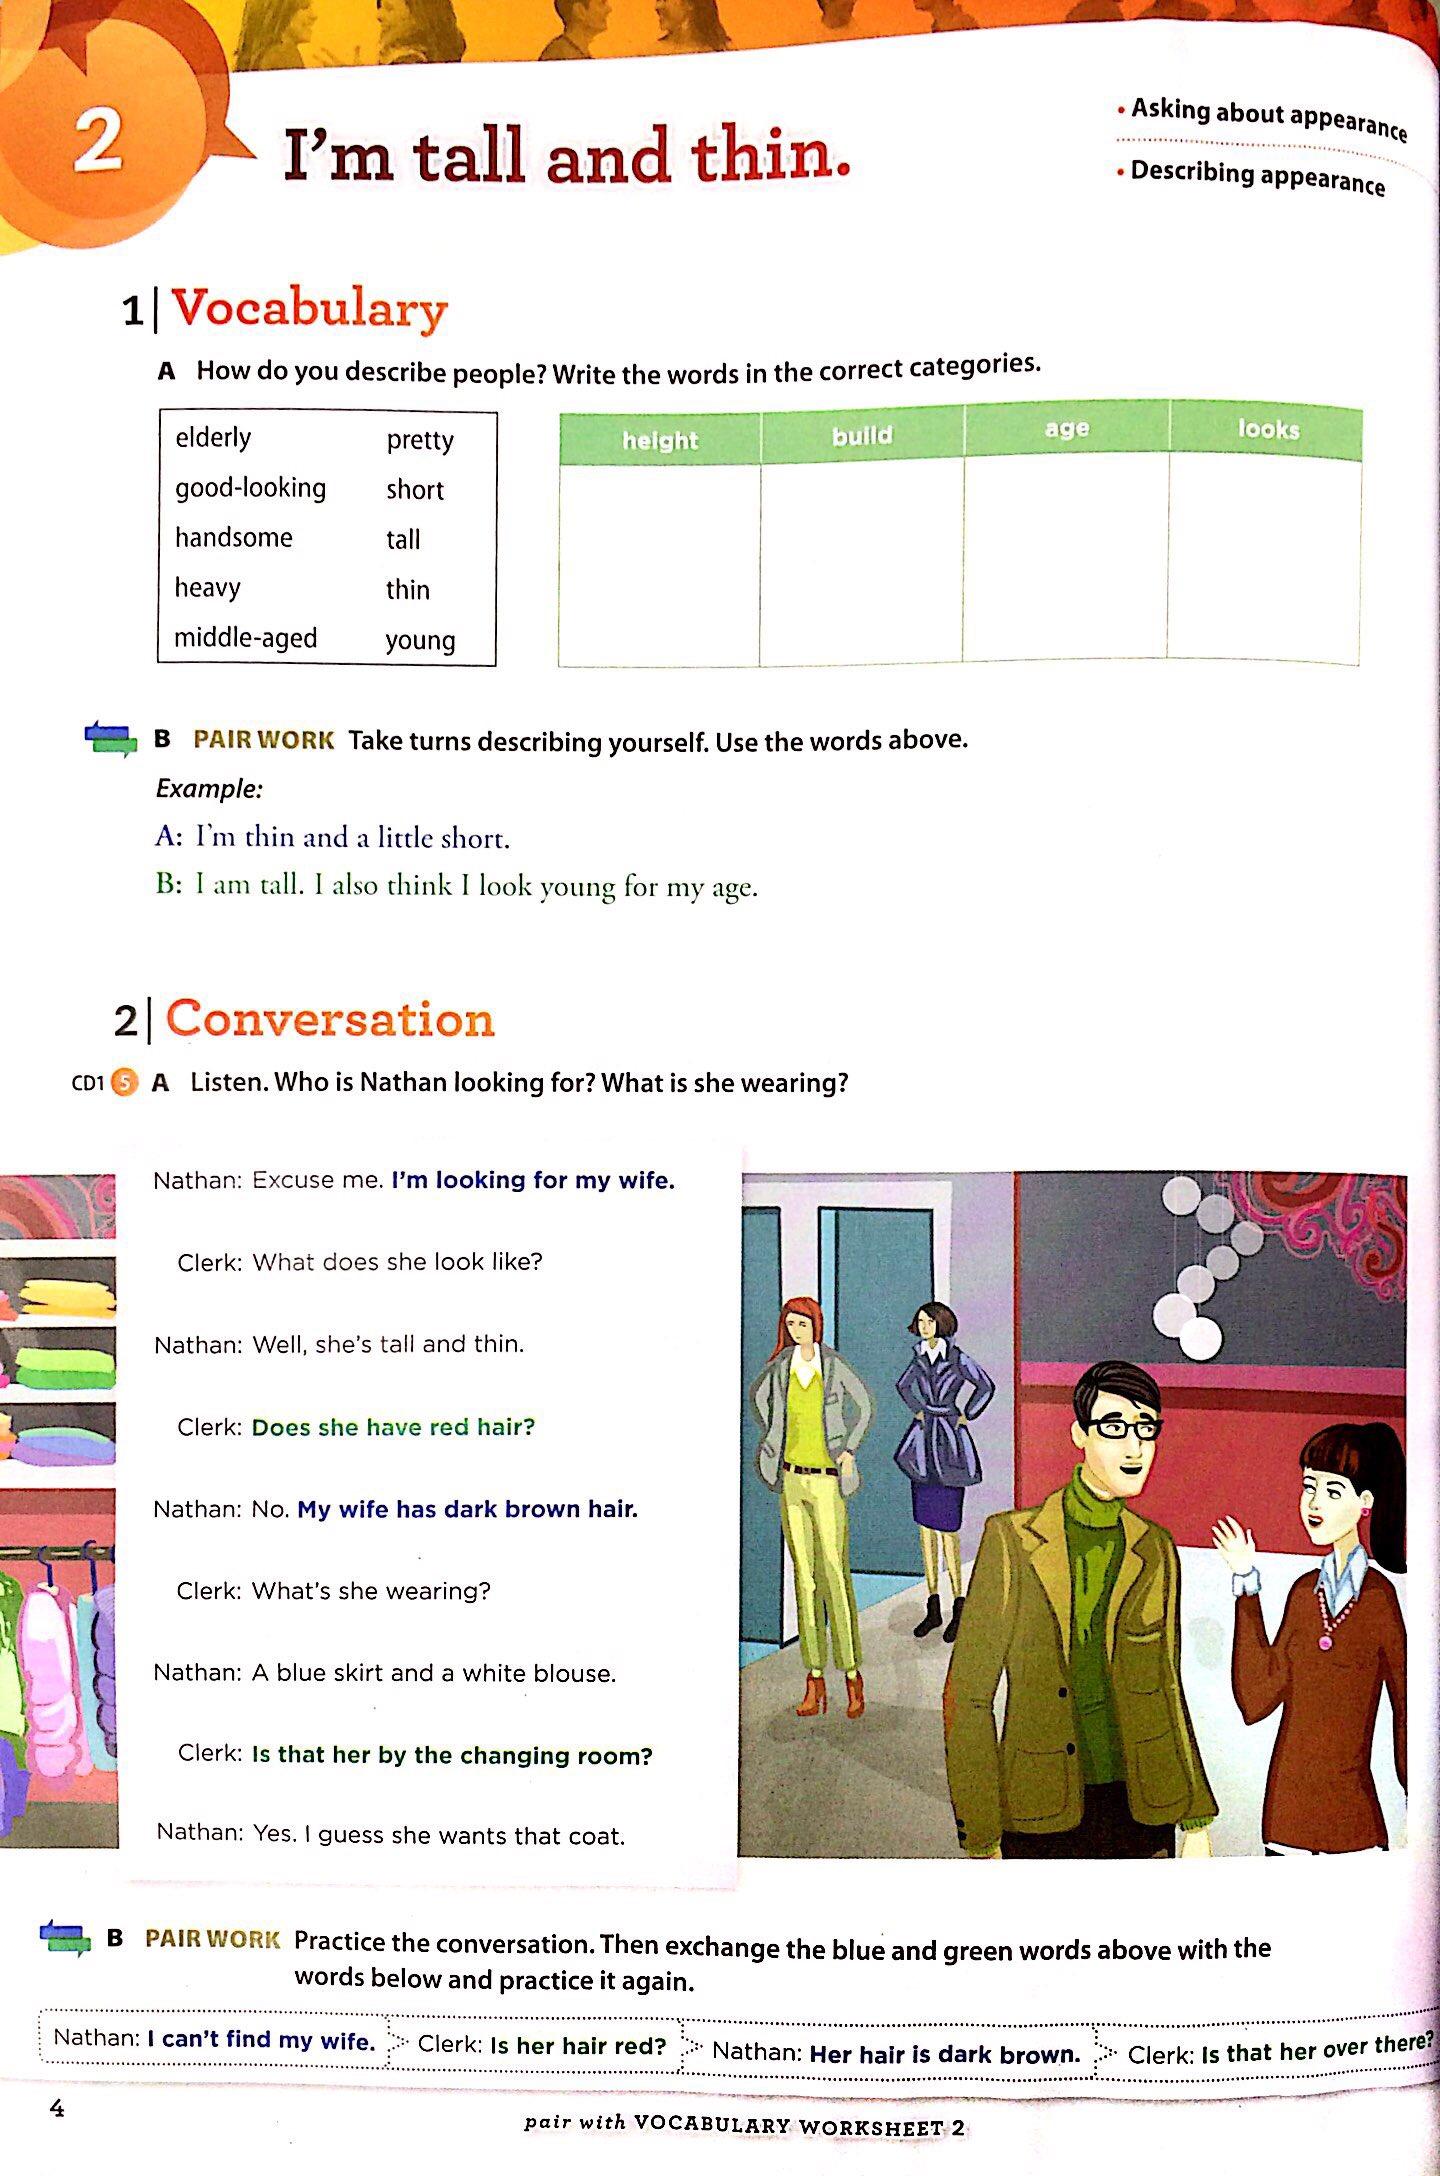 Hình ảnh Speak Now Level 2 - Student Book And Access Card Pack